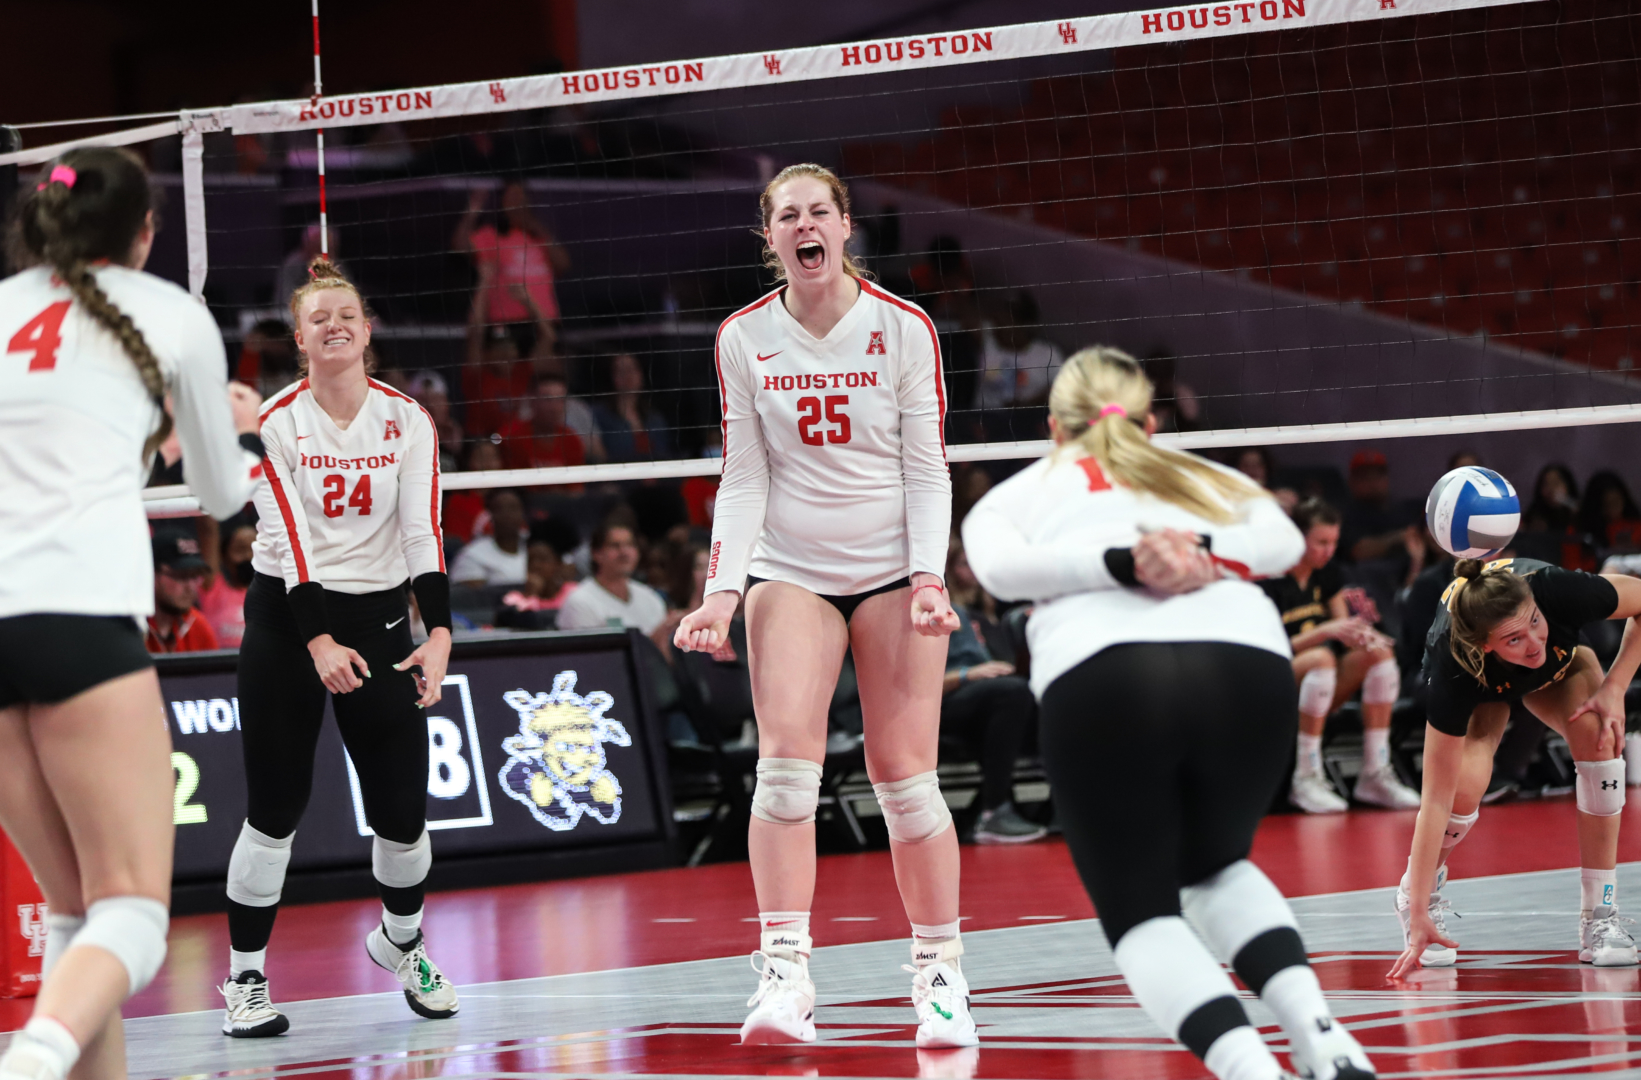 No. 24 UH volleyball stayed red-hot over the weekend, extending its winning streak to 11 with victories over Wichita State and Tulsa. Sean Thomas/The Cougar